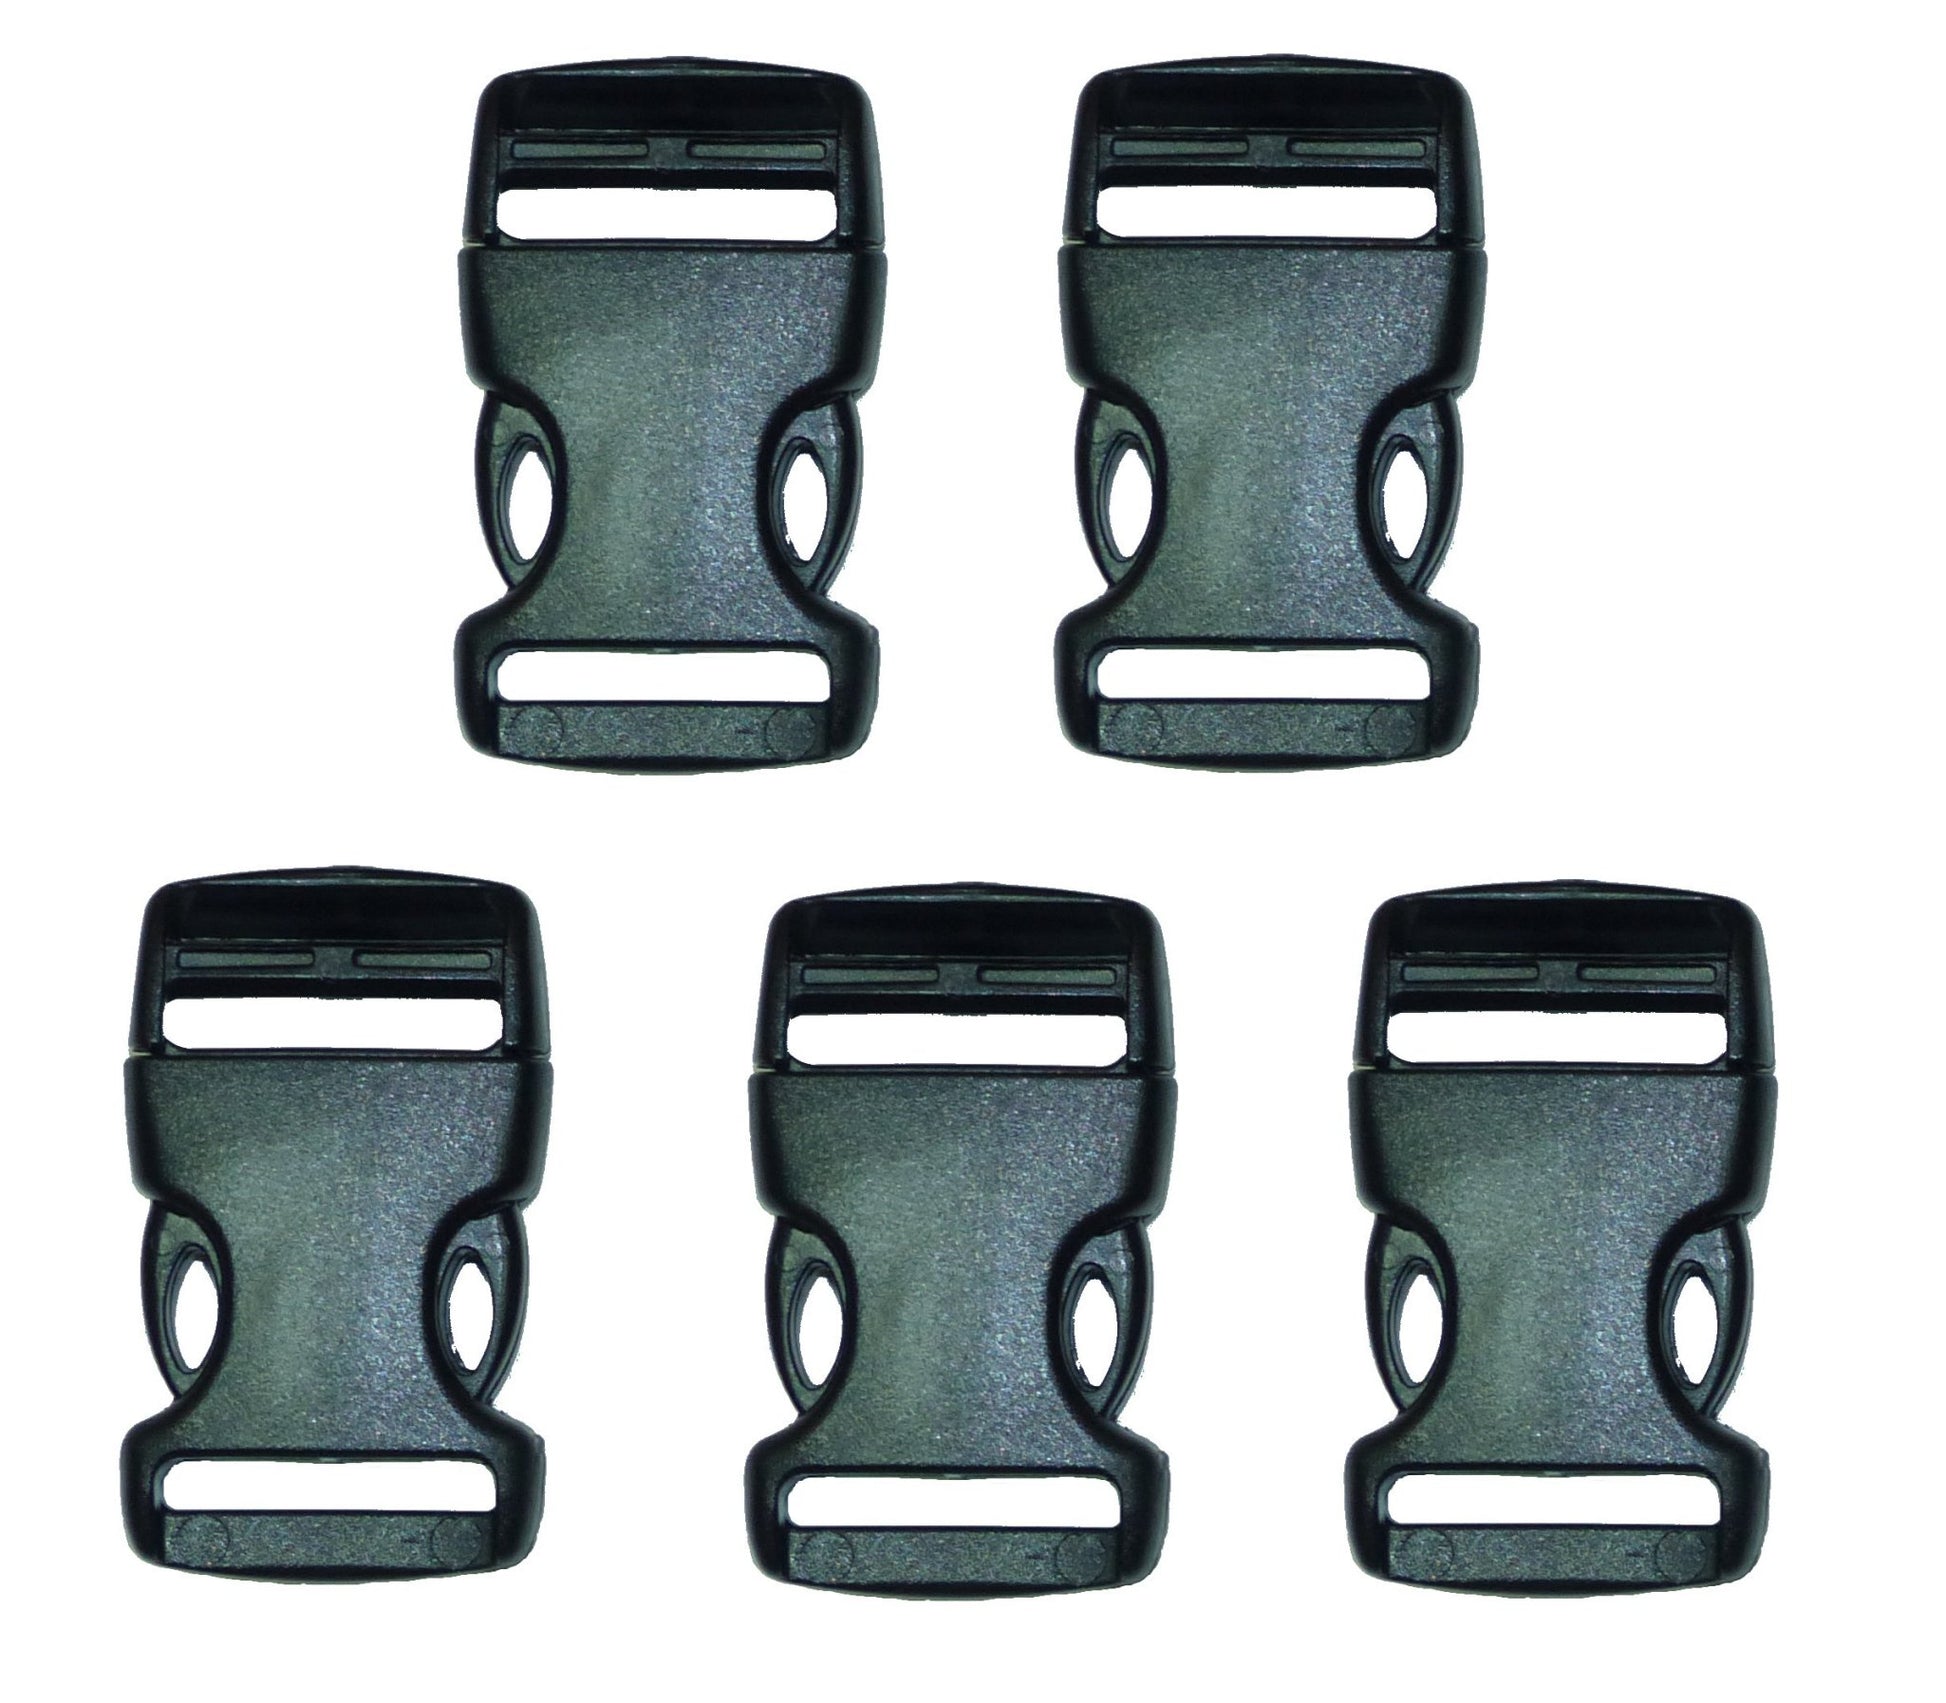 Benristraps 20mm plastic quick release buckle (pack of 5)